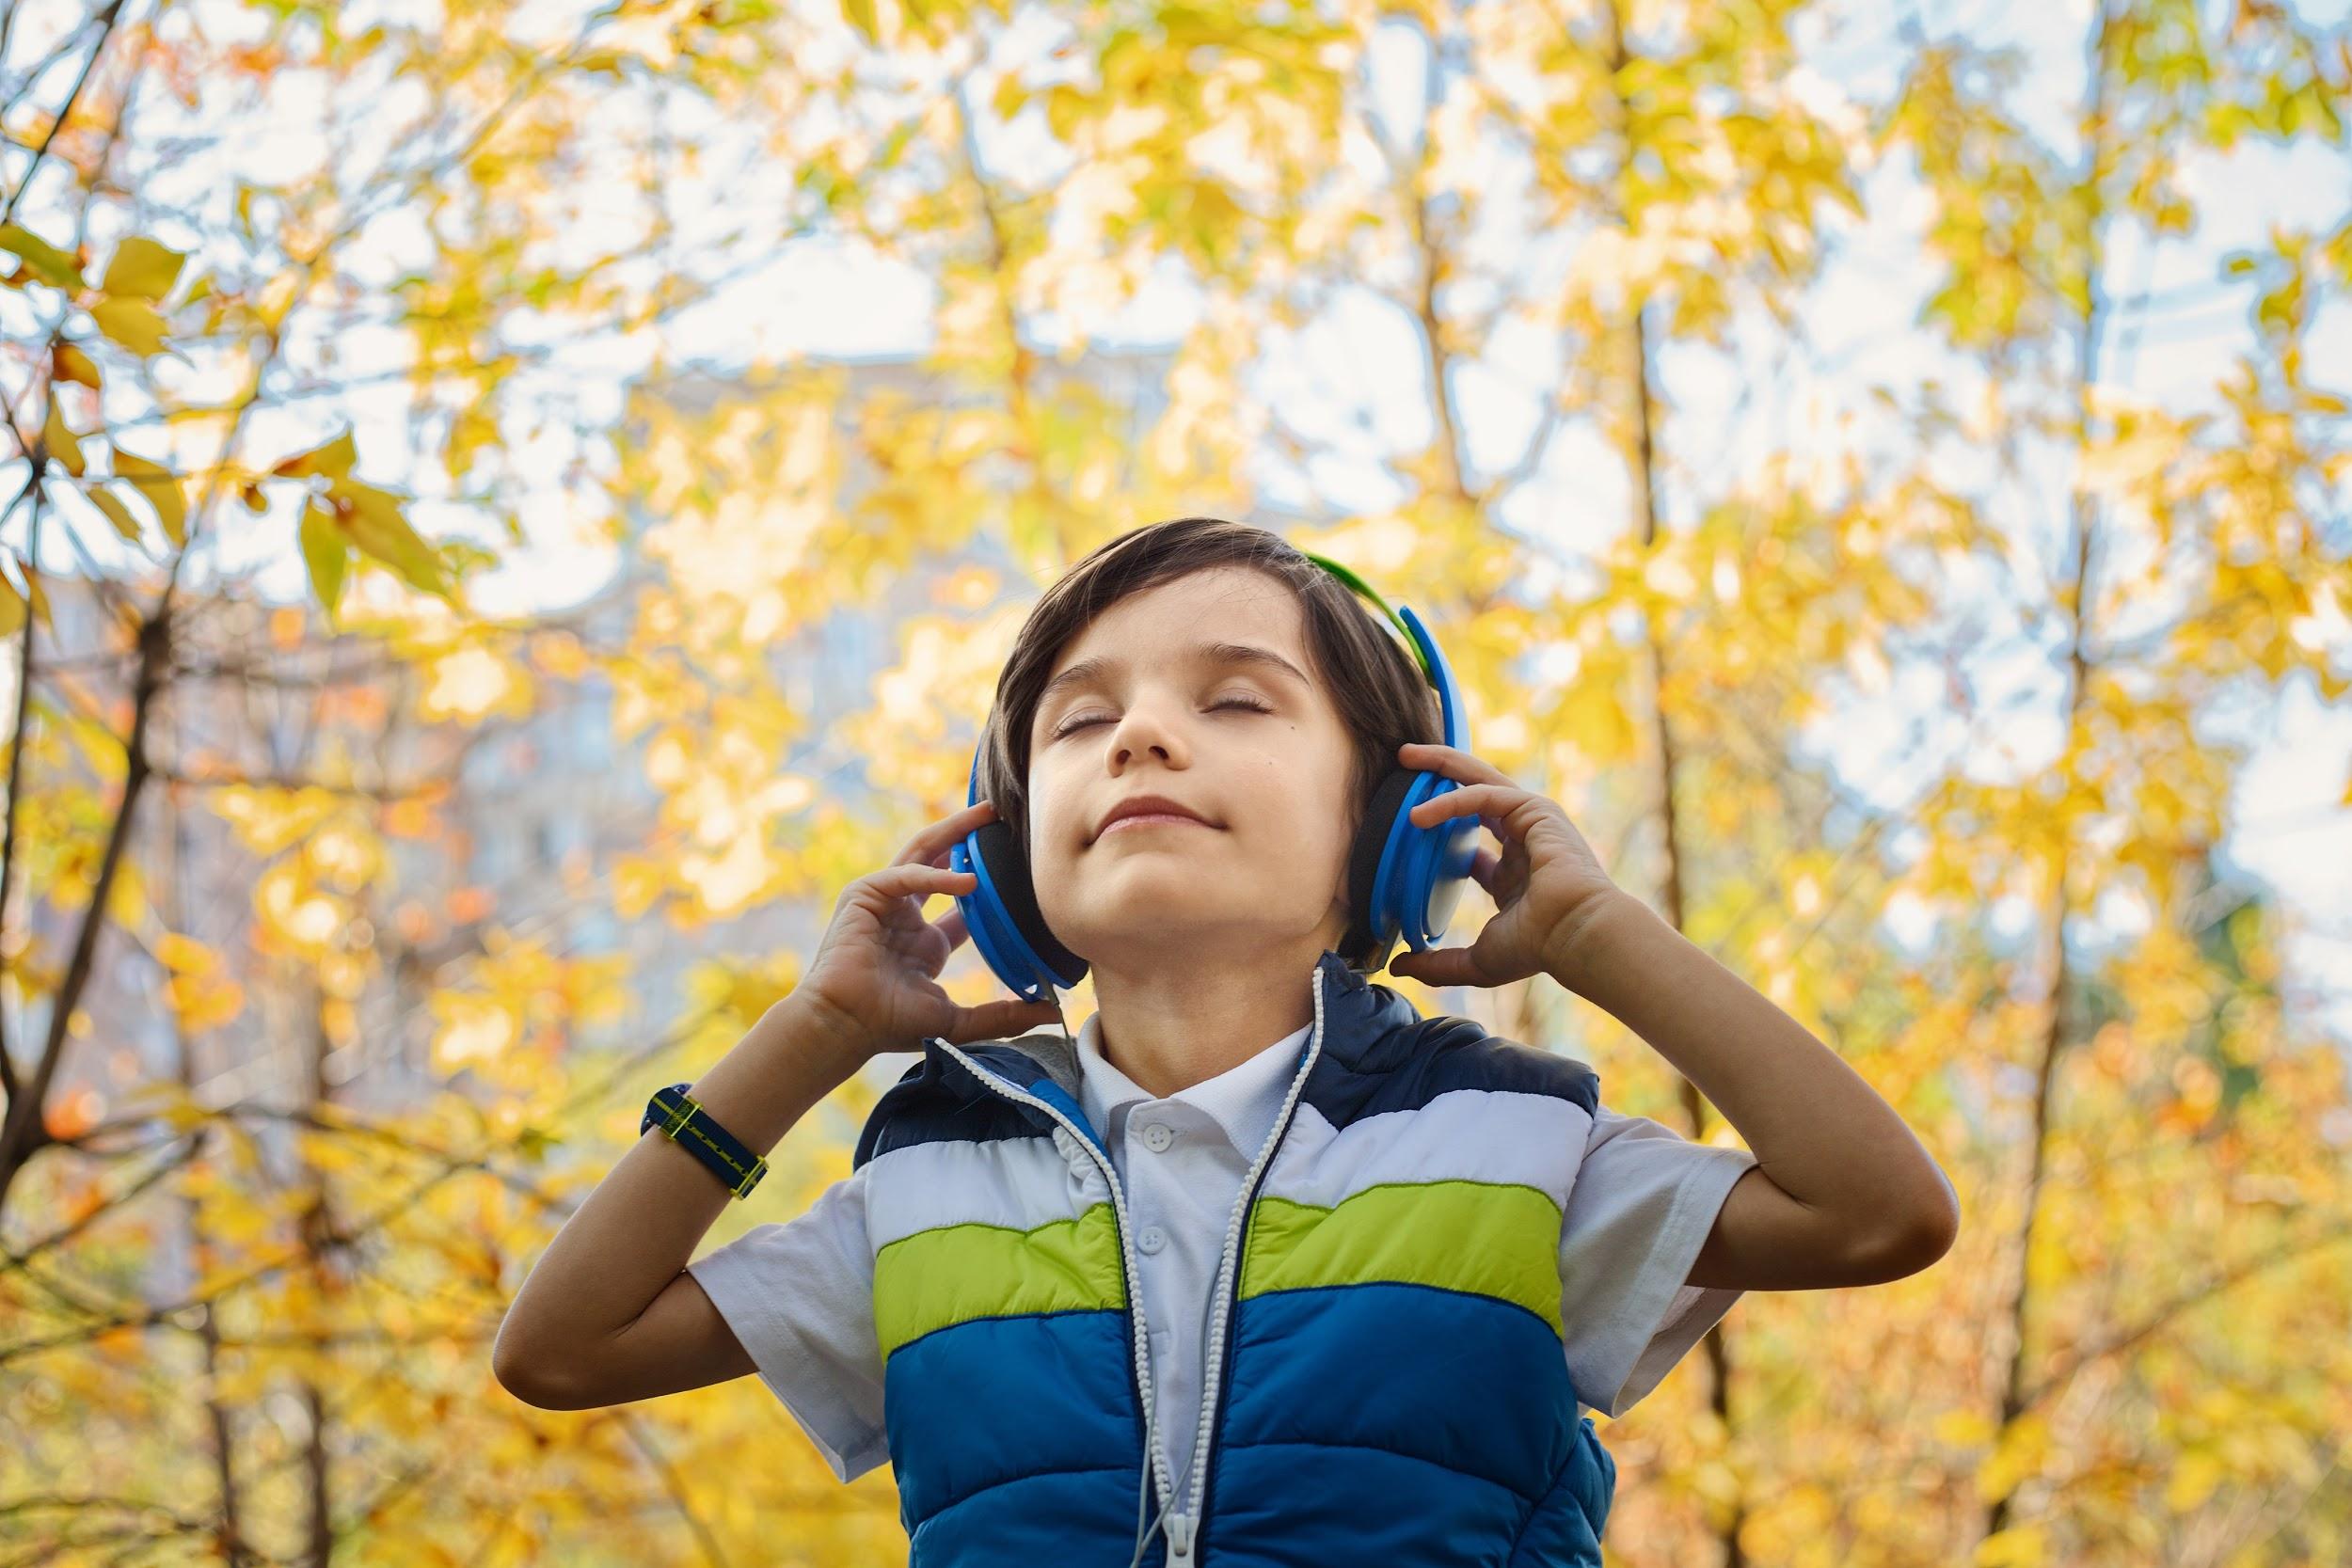 Why You Should Encourage Your Toddler to Listen to Music